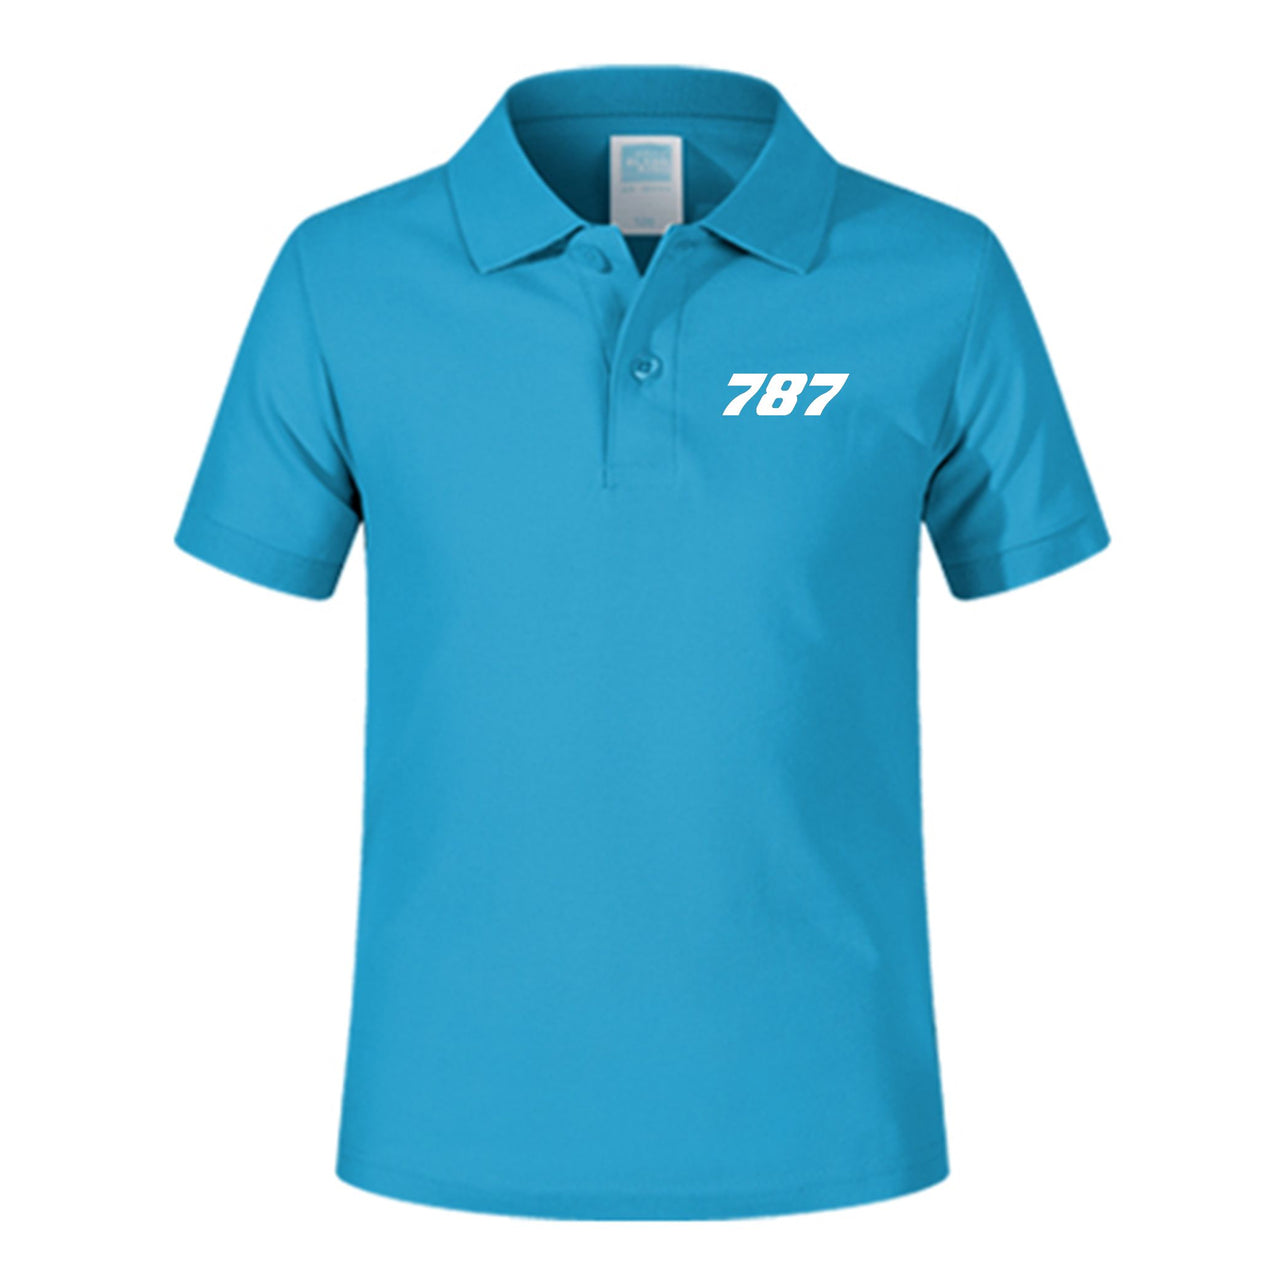 787 Flat Text Designed Children Polo T-Shirts